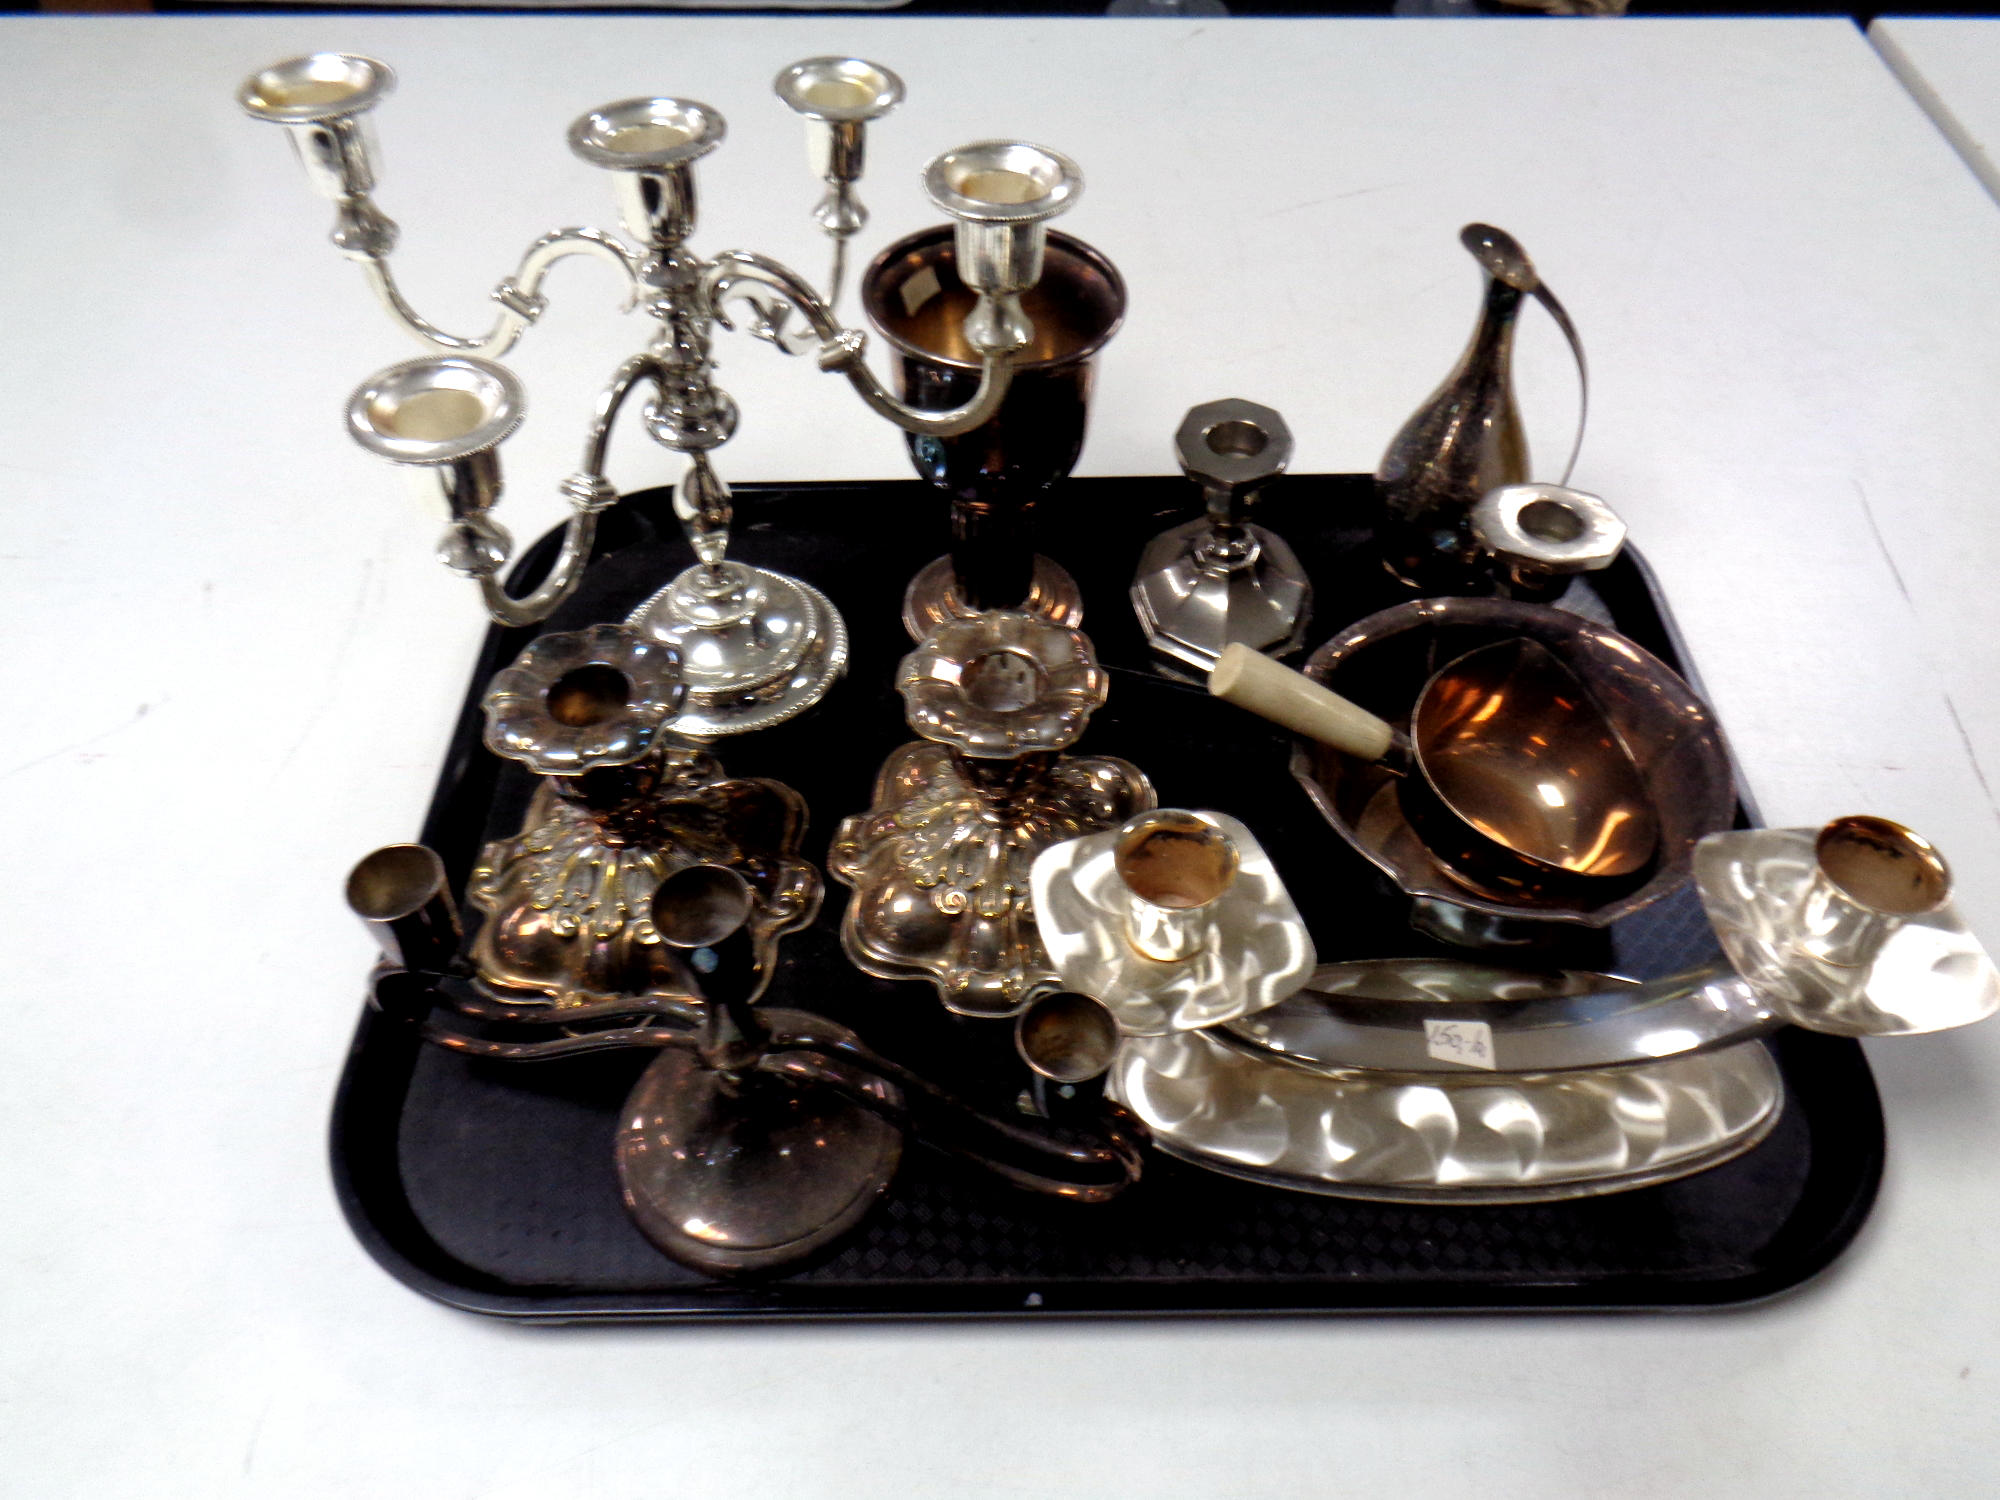 A tray of antique and later plated wares : candlesticks,